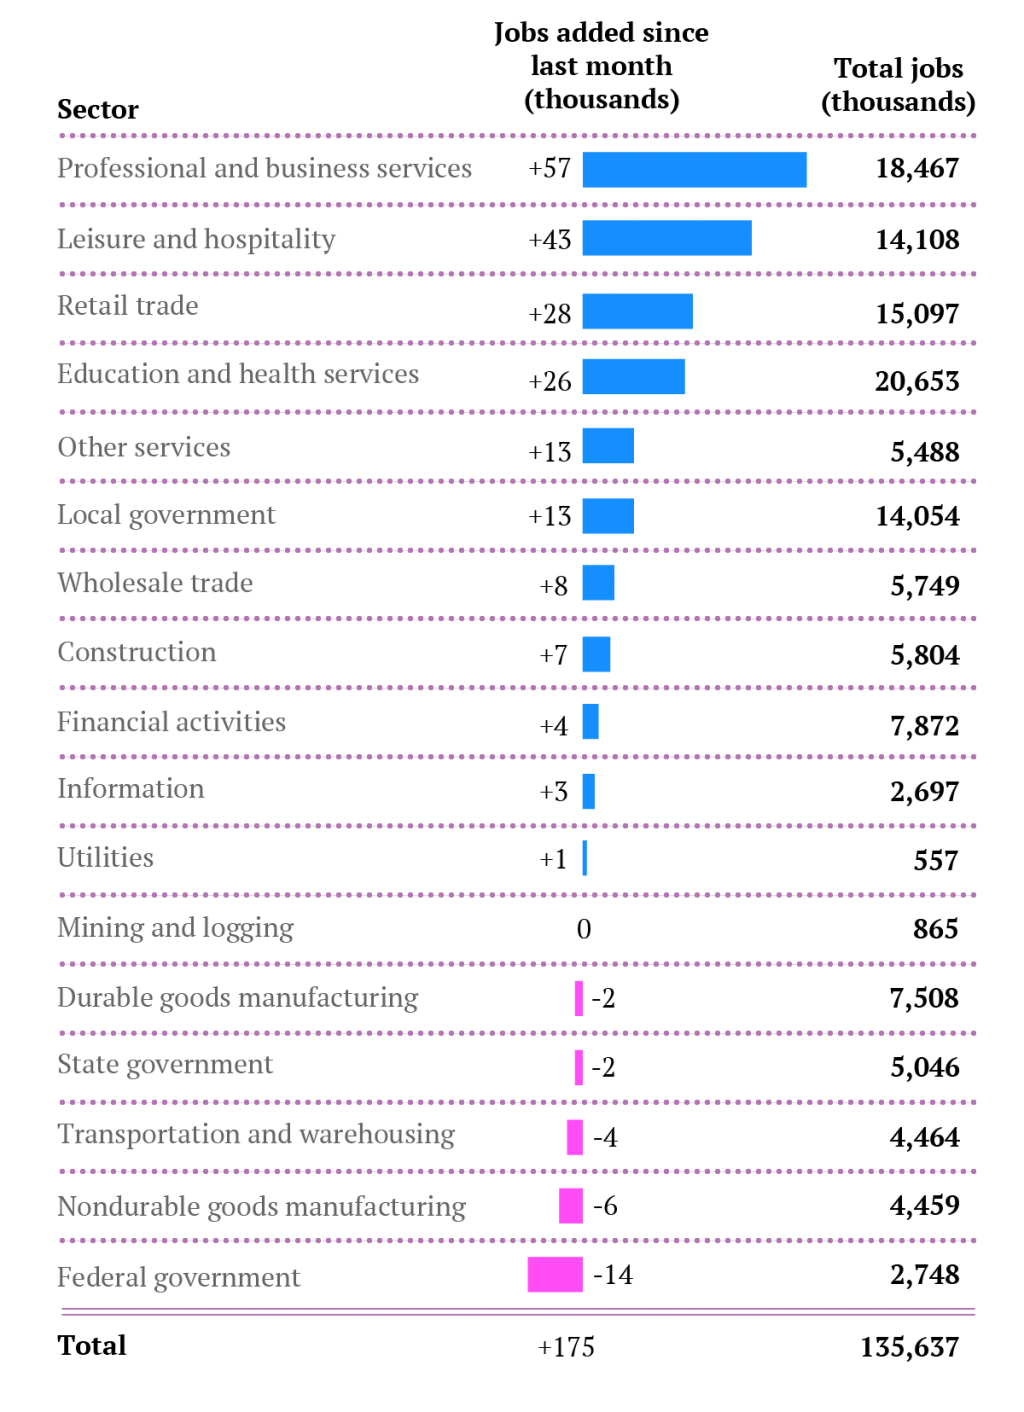 Jobs-by-sector-May13-2